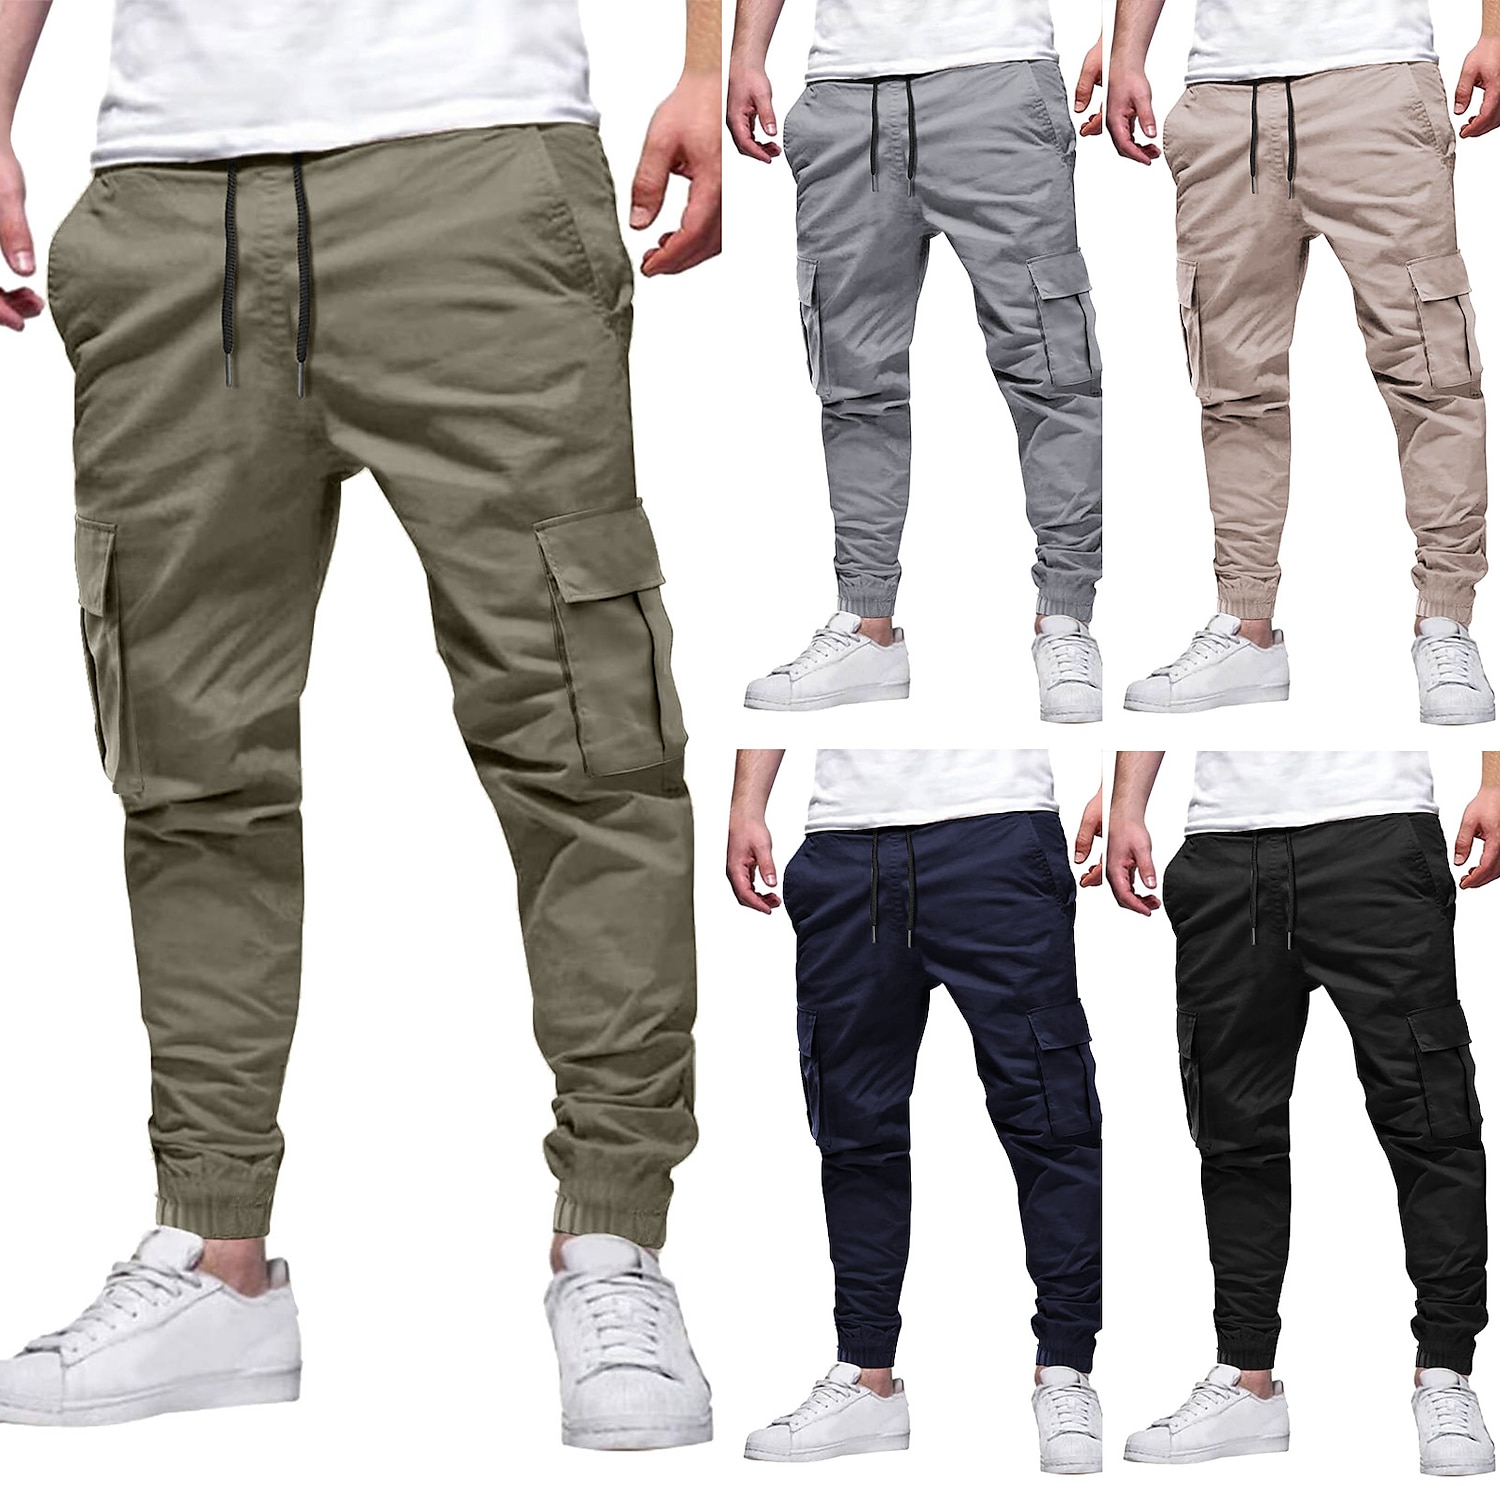 Buy Morinfit Mens Six Pocket Cotton Lycra Stylish Cargo Pant | Regular Slim  Fit | Cargos with 6 Pockets | Mens Street Wear Casual Trouser Pants |  Cement Dark Grey (30) at Amazon.in